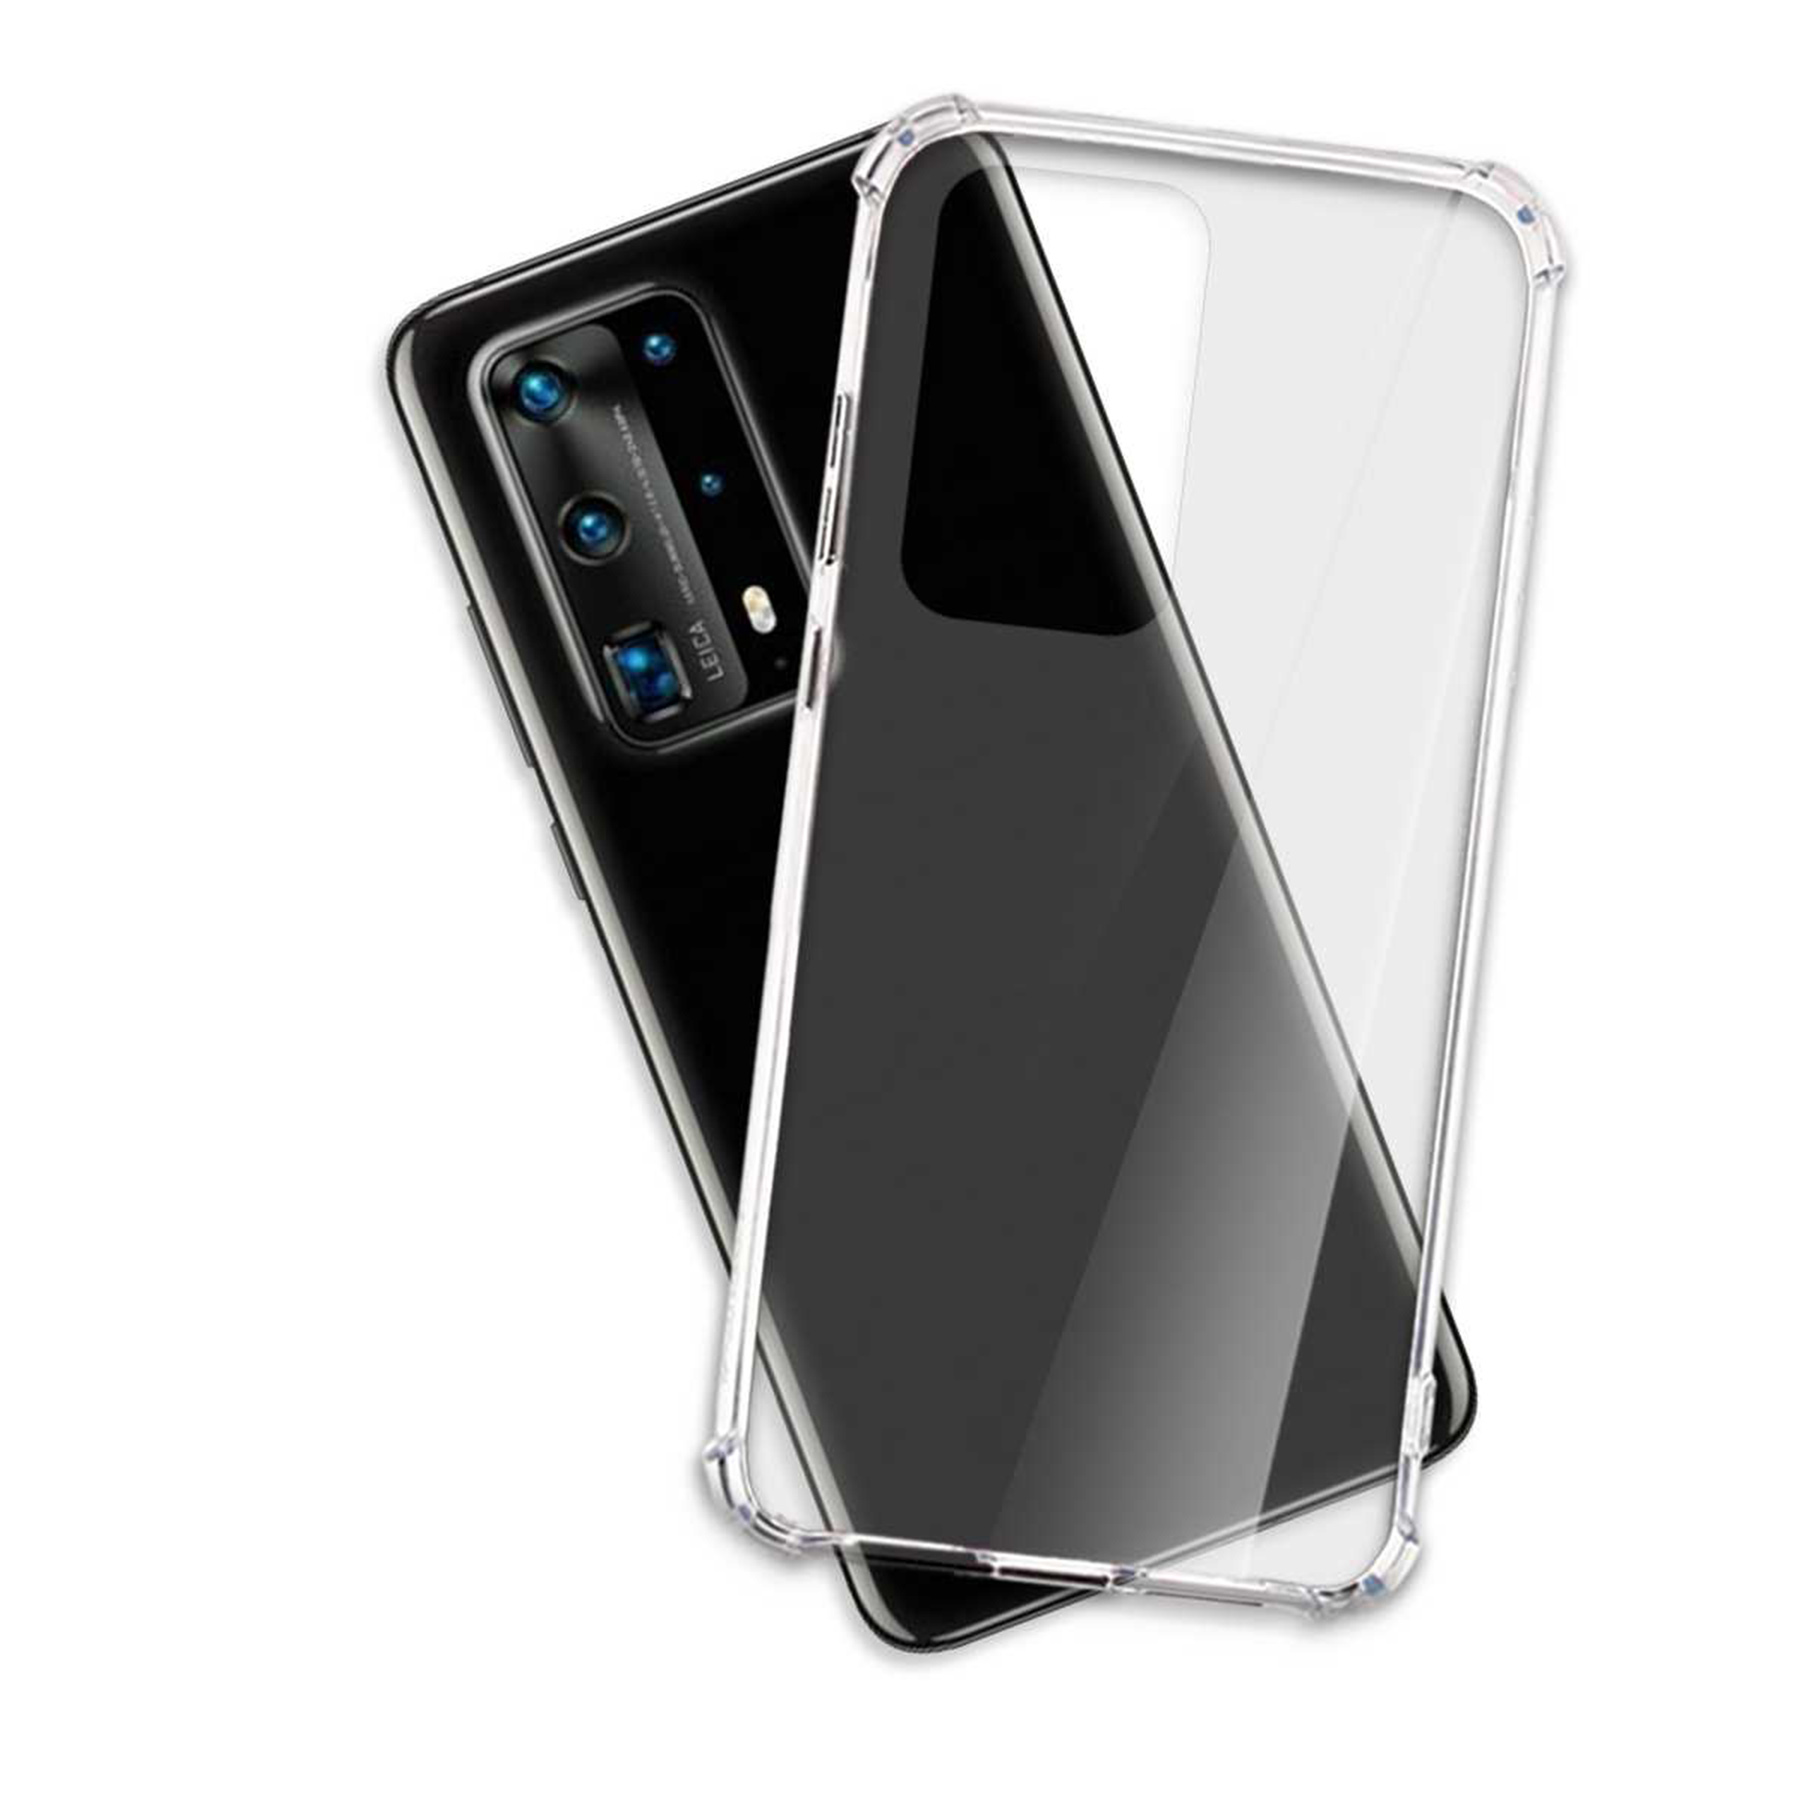 Backcover, Clear MTB ENERGY P40 Case, Armor 5G, Huawei, Transparent MORE Plus Pro